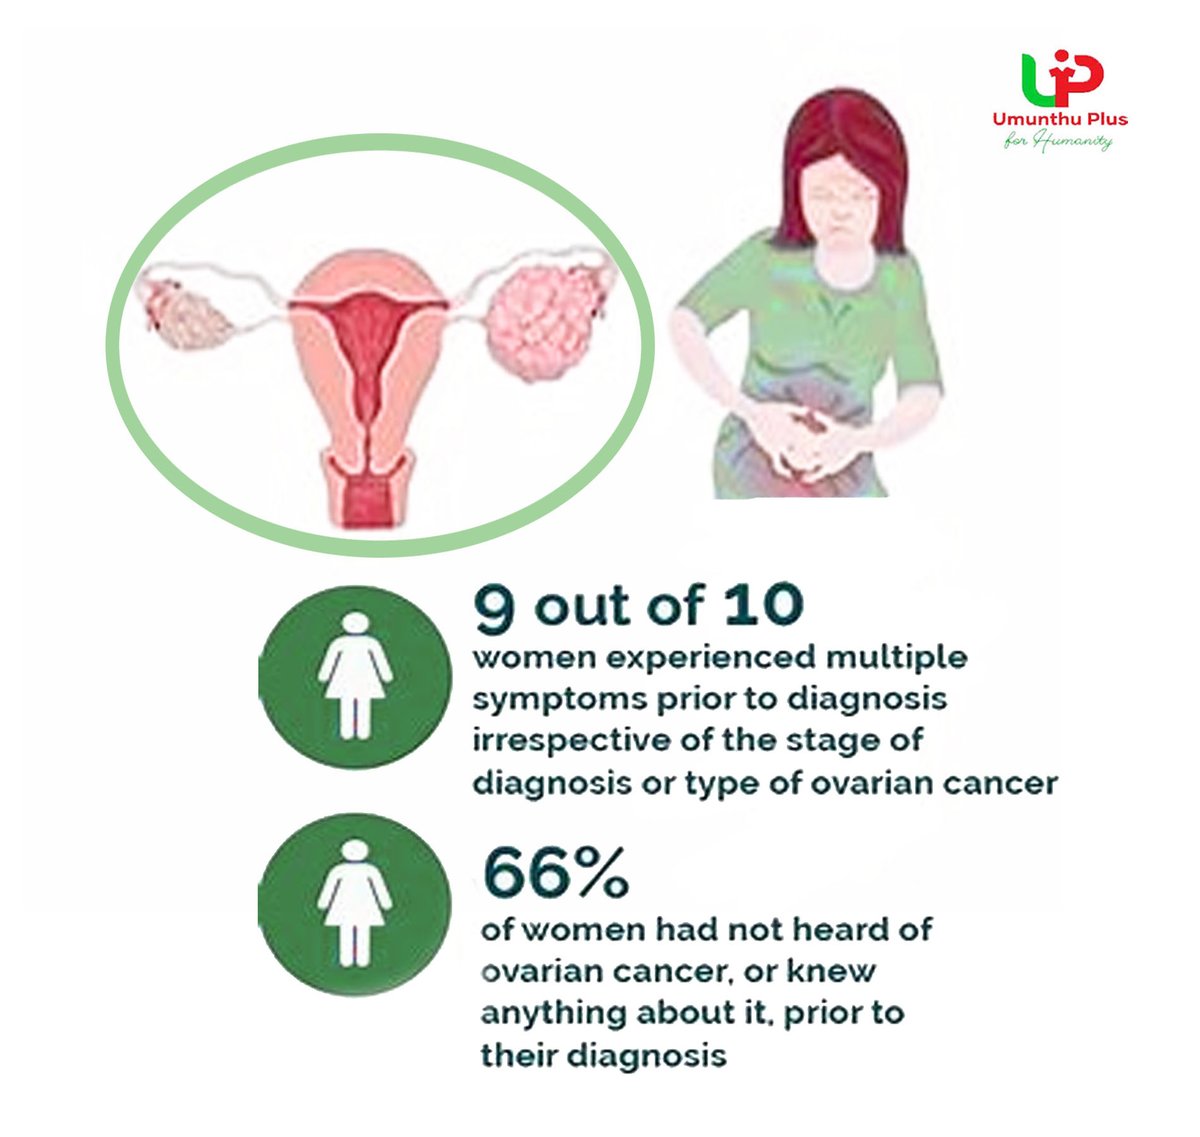 Regular screenings, health habits and early interventions reduce the burden of cancer on individuals and communities.
#cancerawareness
@UN_Women @ViiVHC @AmericanCancer @SU2C @CDC_Cancer @theNCI @CR_UK @TeenageCancer